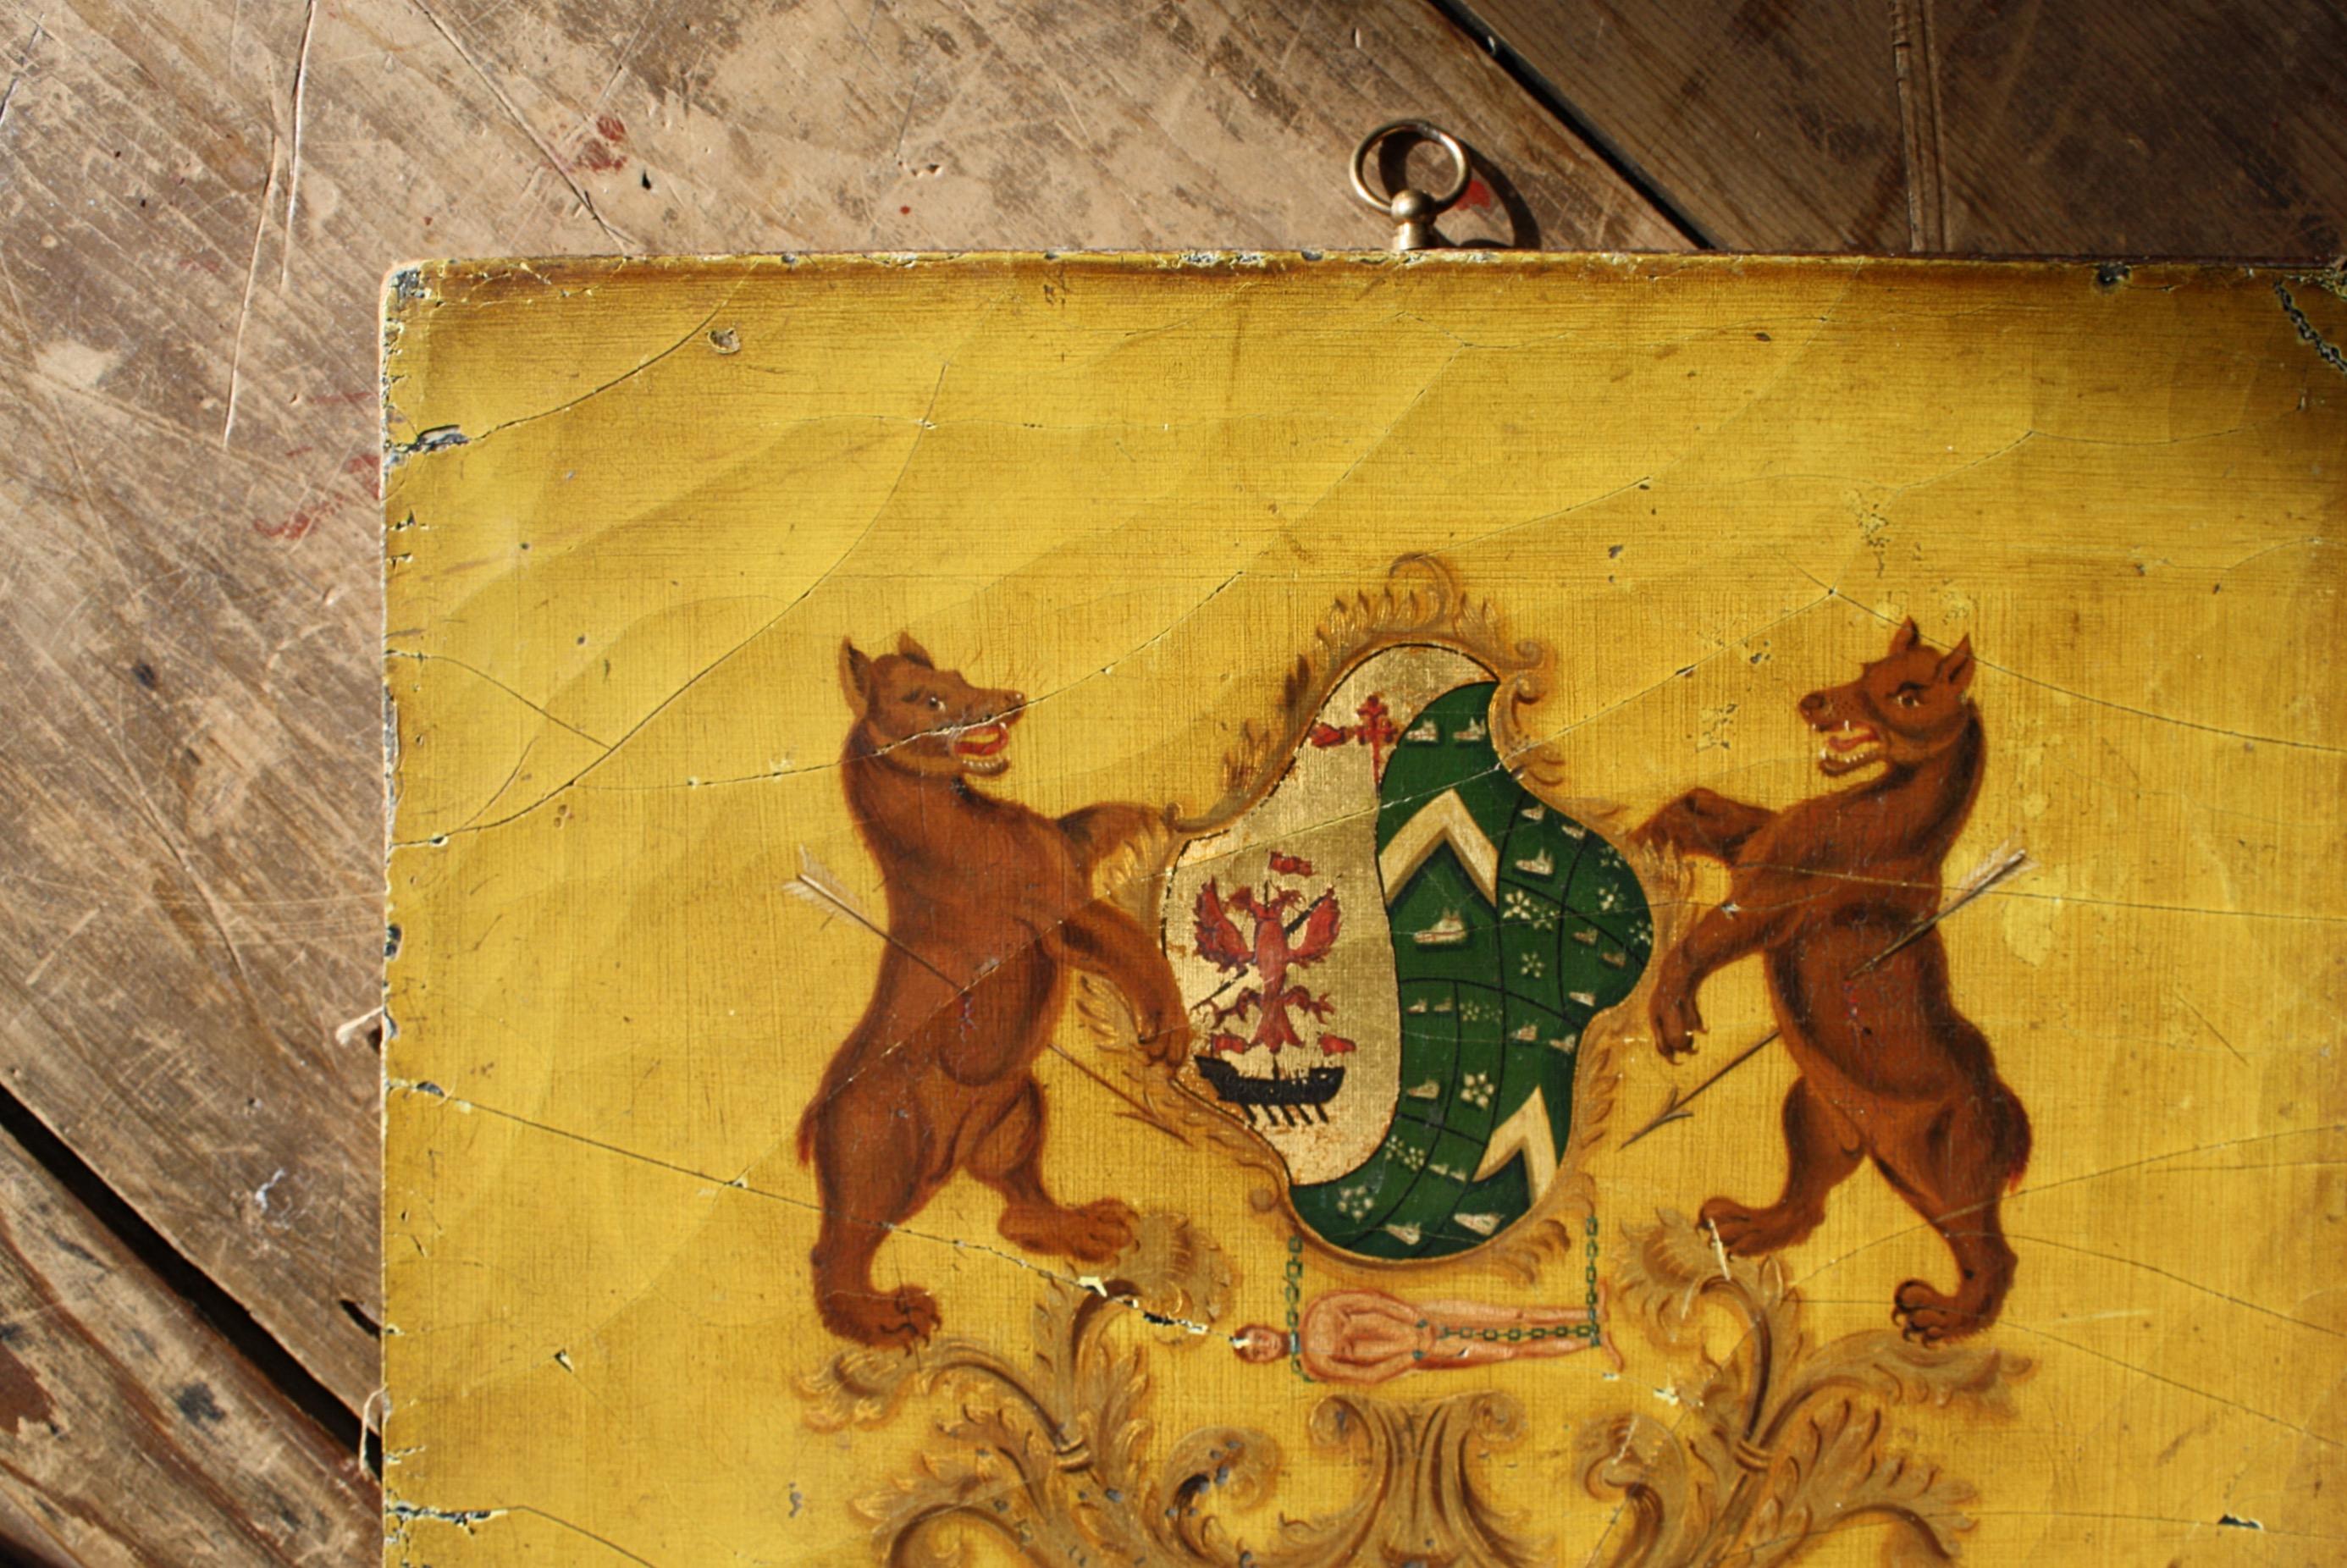 A good early 19th century coach panel, two impaled bear Stand either side of the coat of arms with a gent bound in chains dangling beneath, all painted on to a beautiful mustard ground. 

Laid canvas on board, with an antique style brass hanging